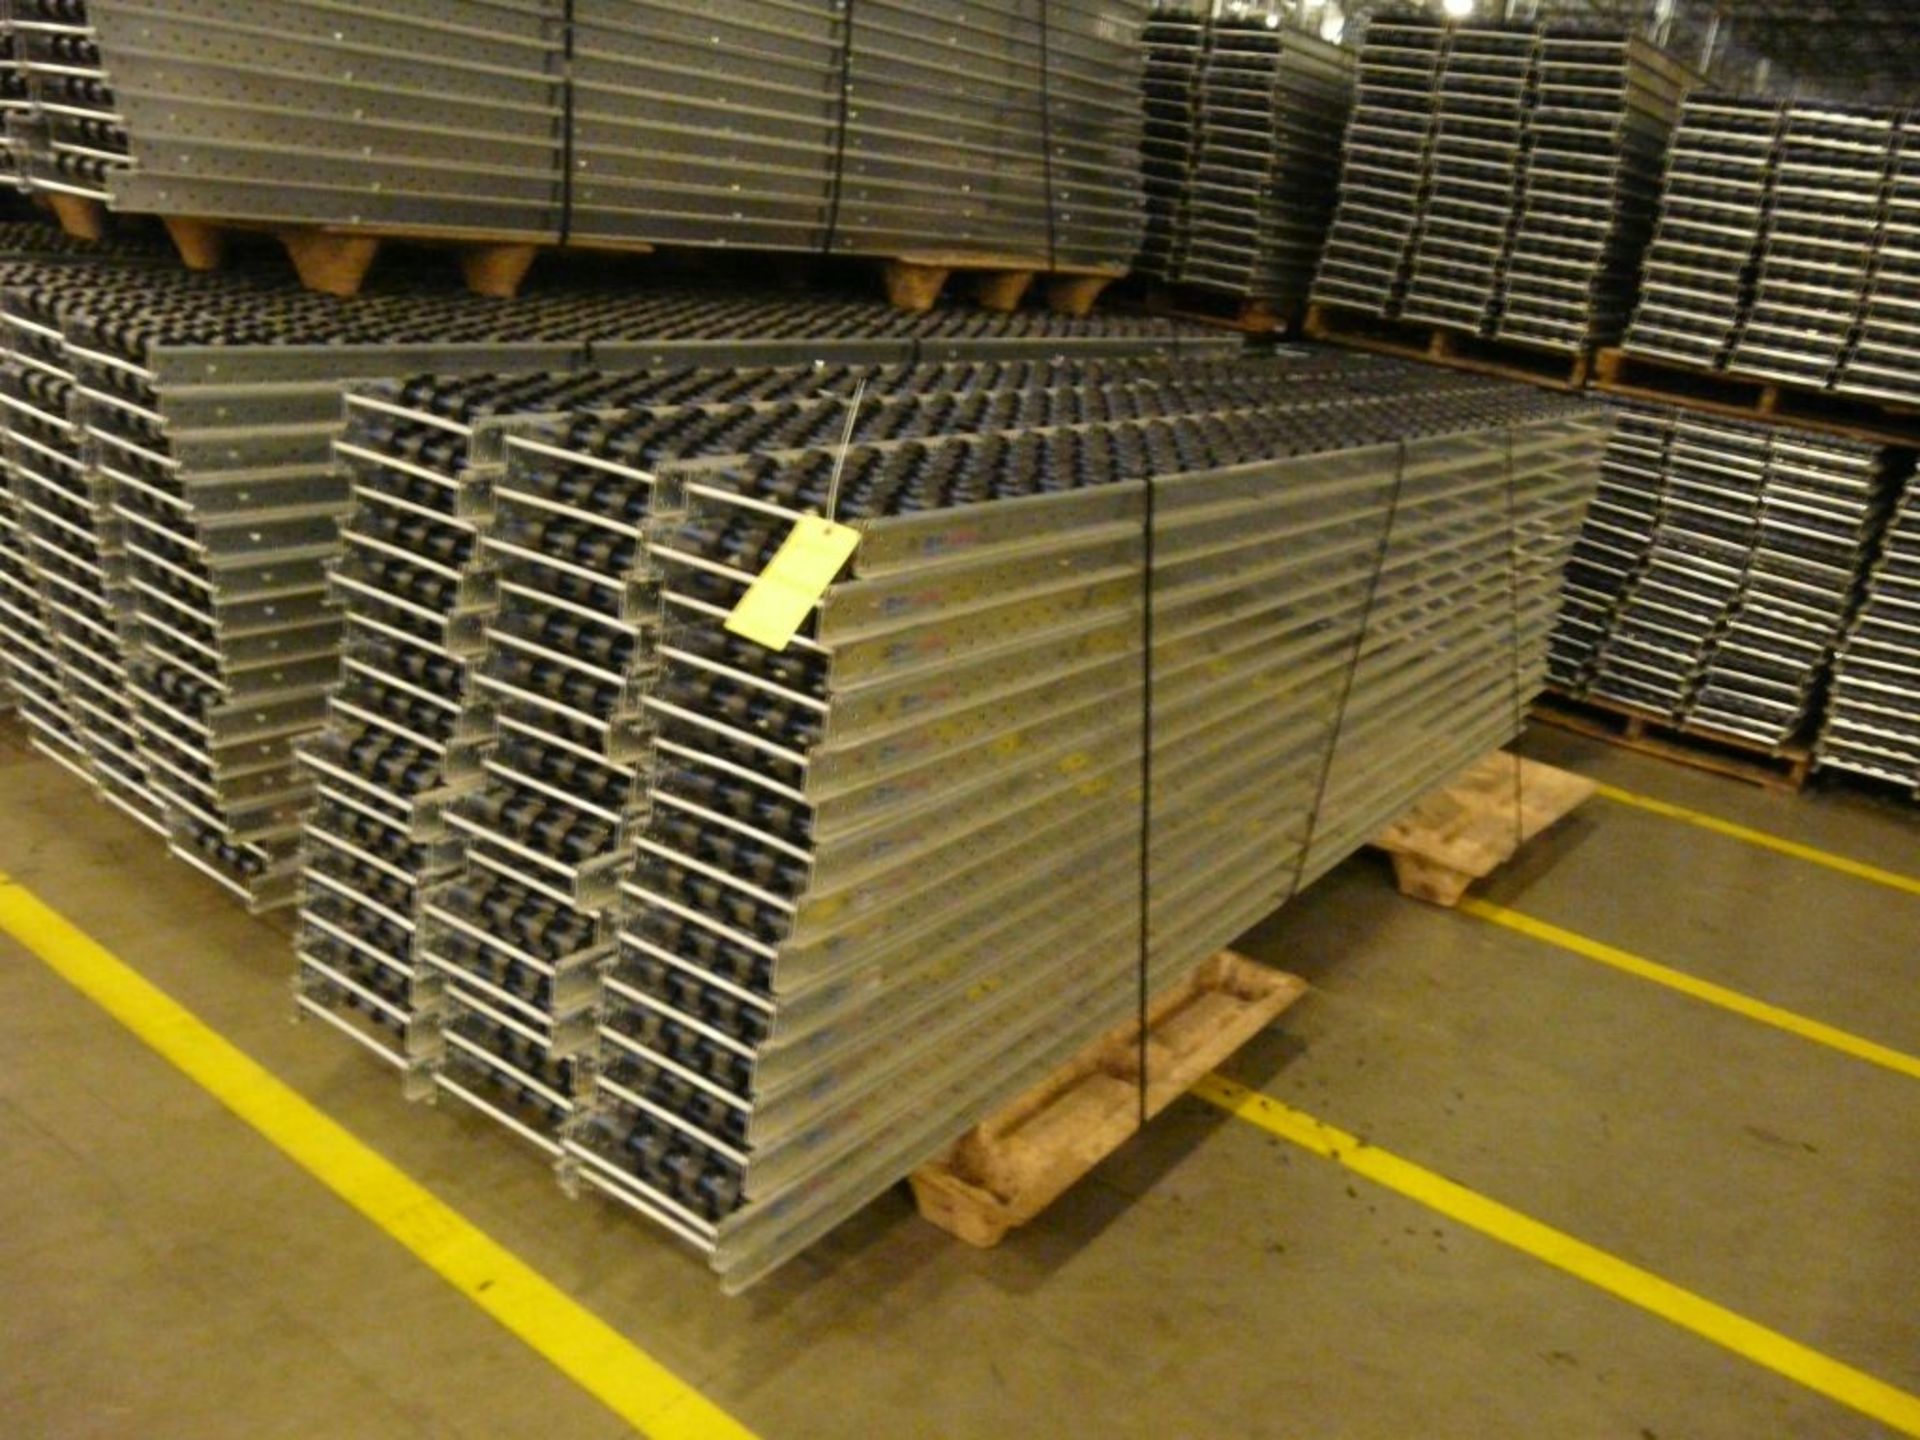 Lot of (90) SpanTrack Wheelbed Carton Flow Conveyors - 11.5'L x 11"W; Tag: 223640 - $30 Lot